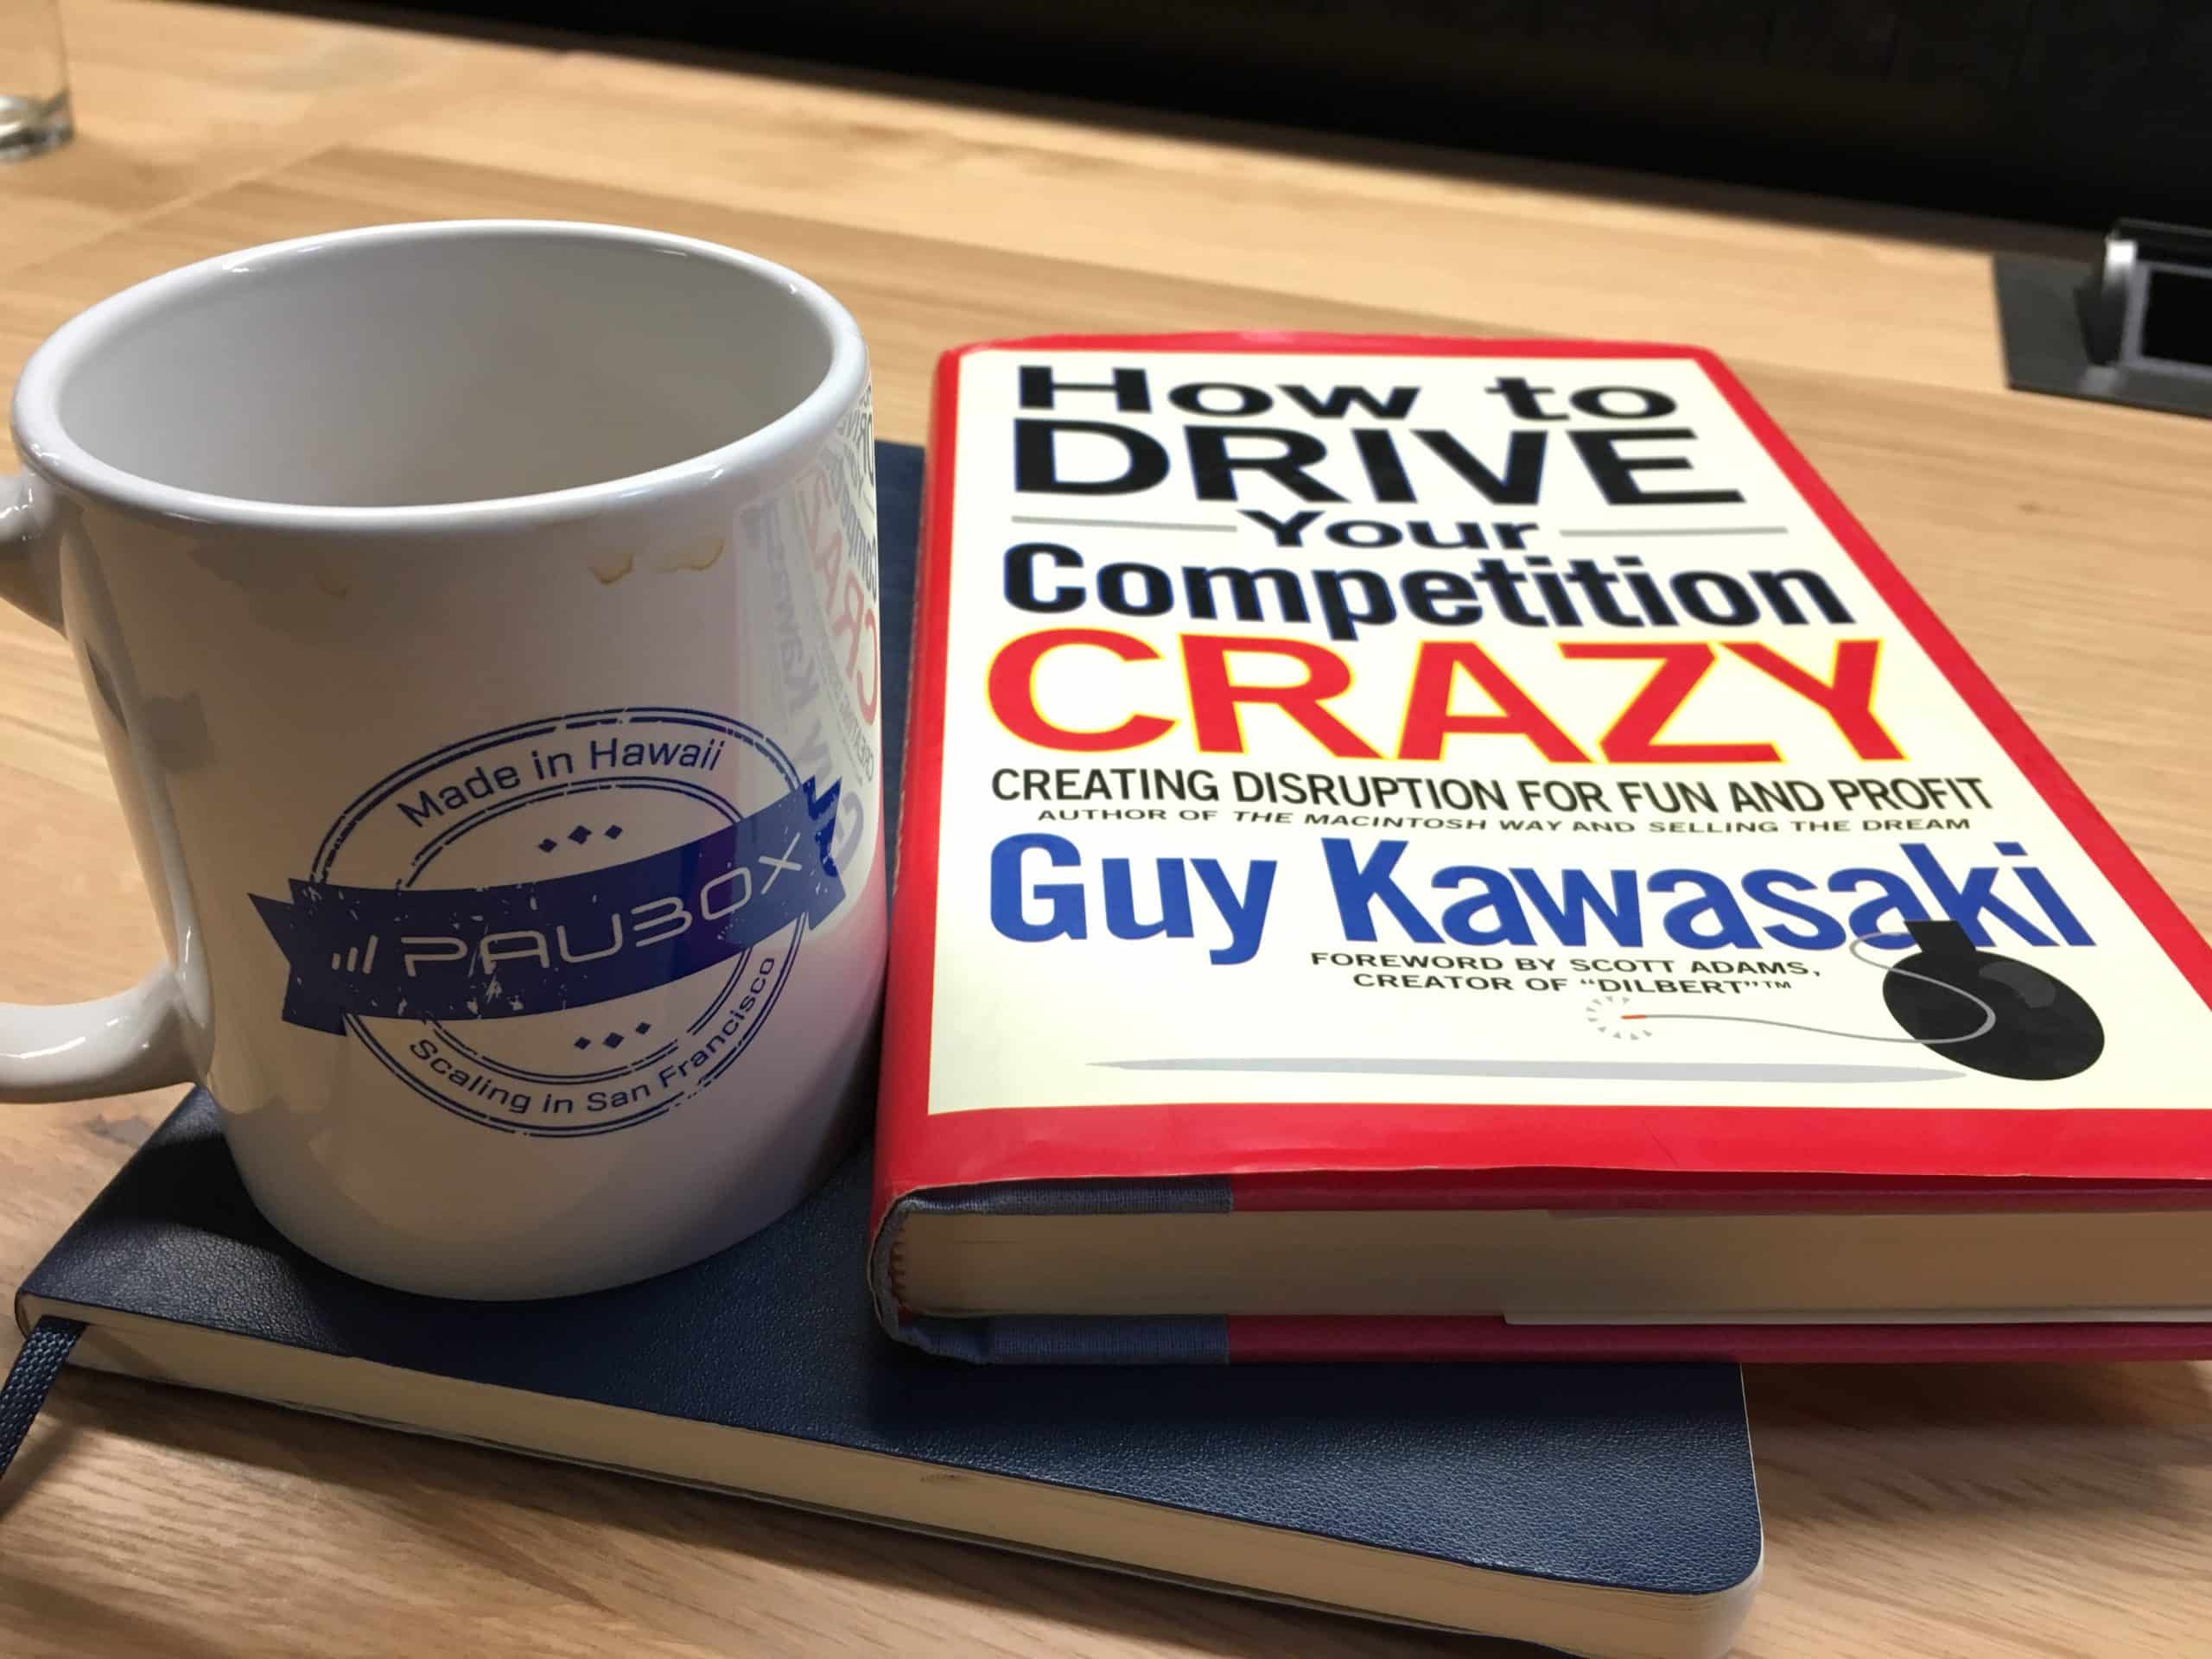 How to Drive Your Competition Crazy by Guy Kawasaki - Our takeaways